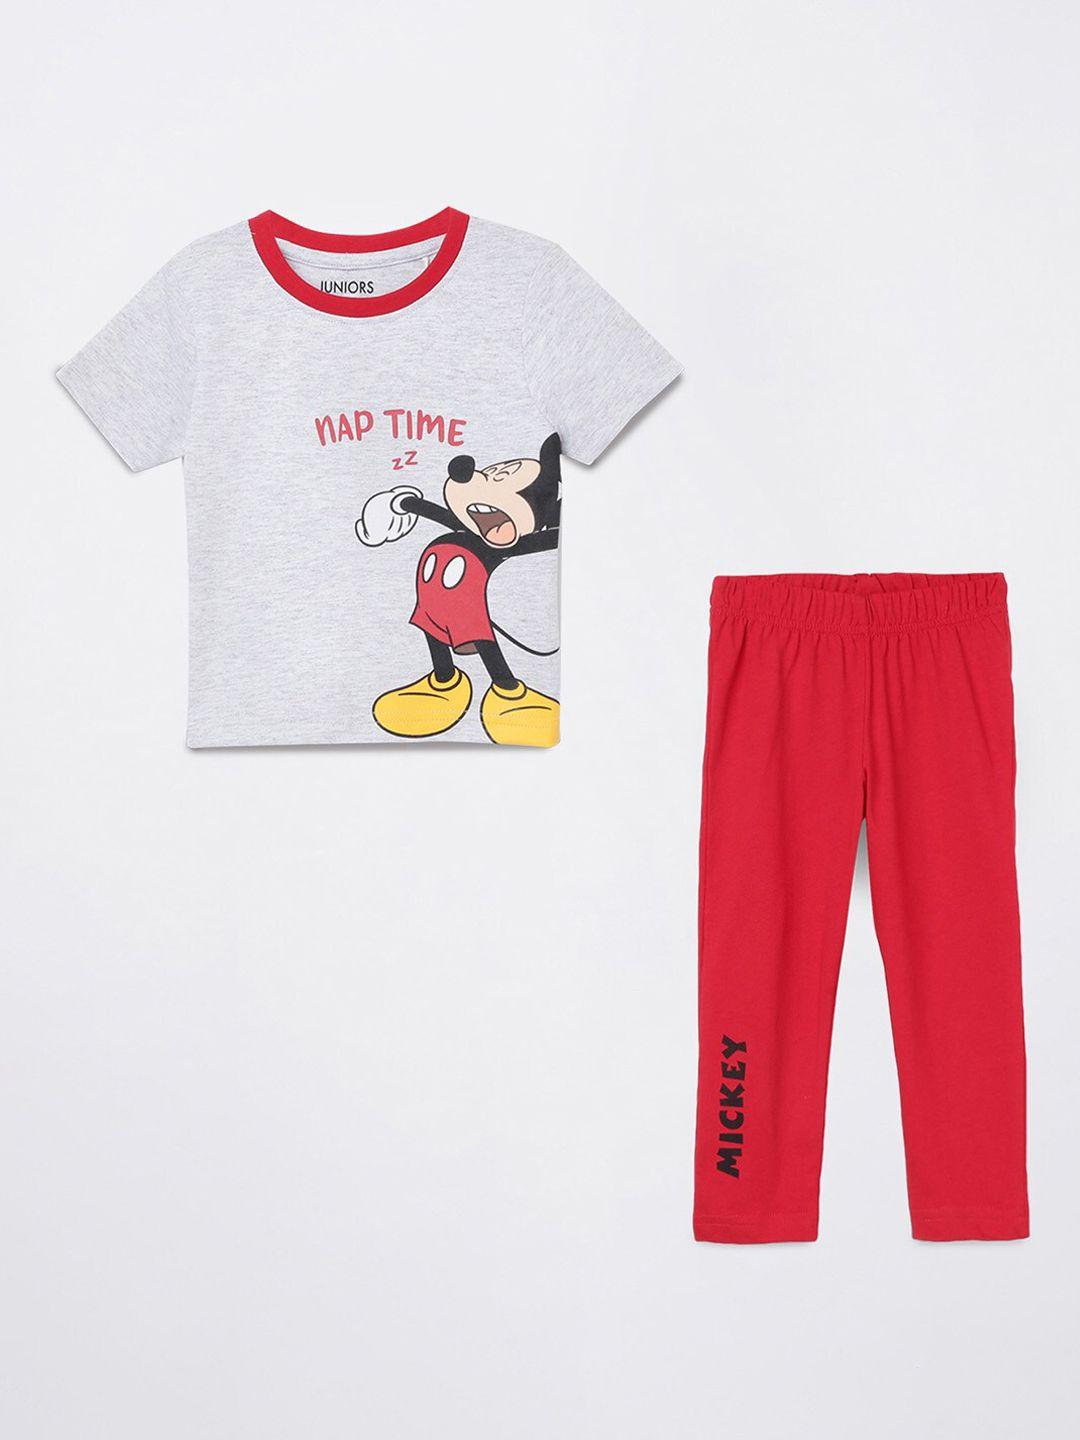 juniors-by-lifestyle-boys-mickey-mouse-printed-clothing-set